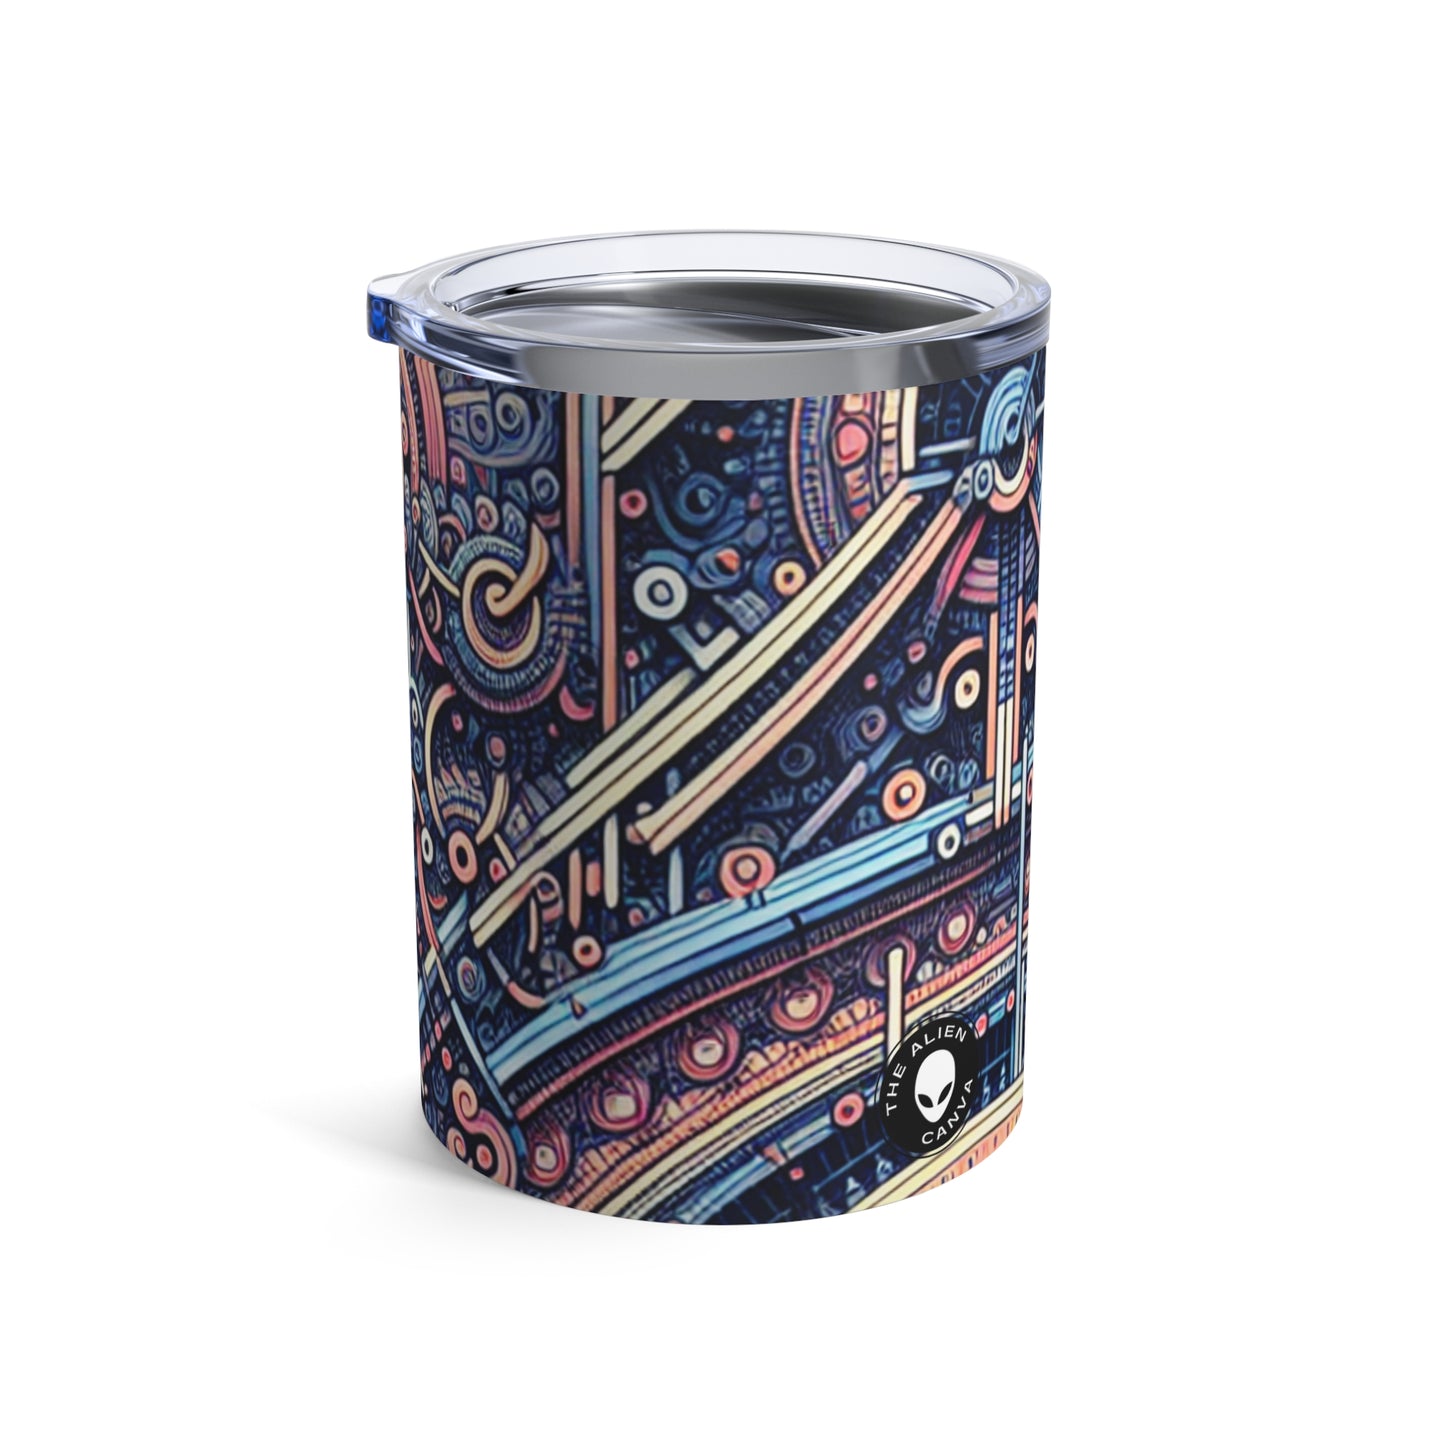 "Chaos & Order: A Dynamic Dance of Colors and Patterns" - The Alien Tumbler 10oz Algorithmic Art